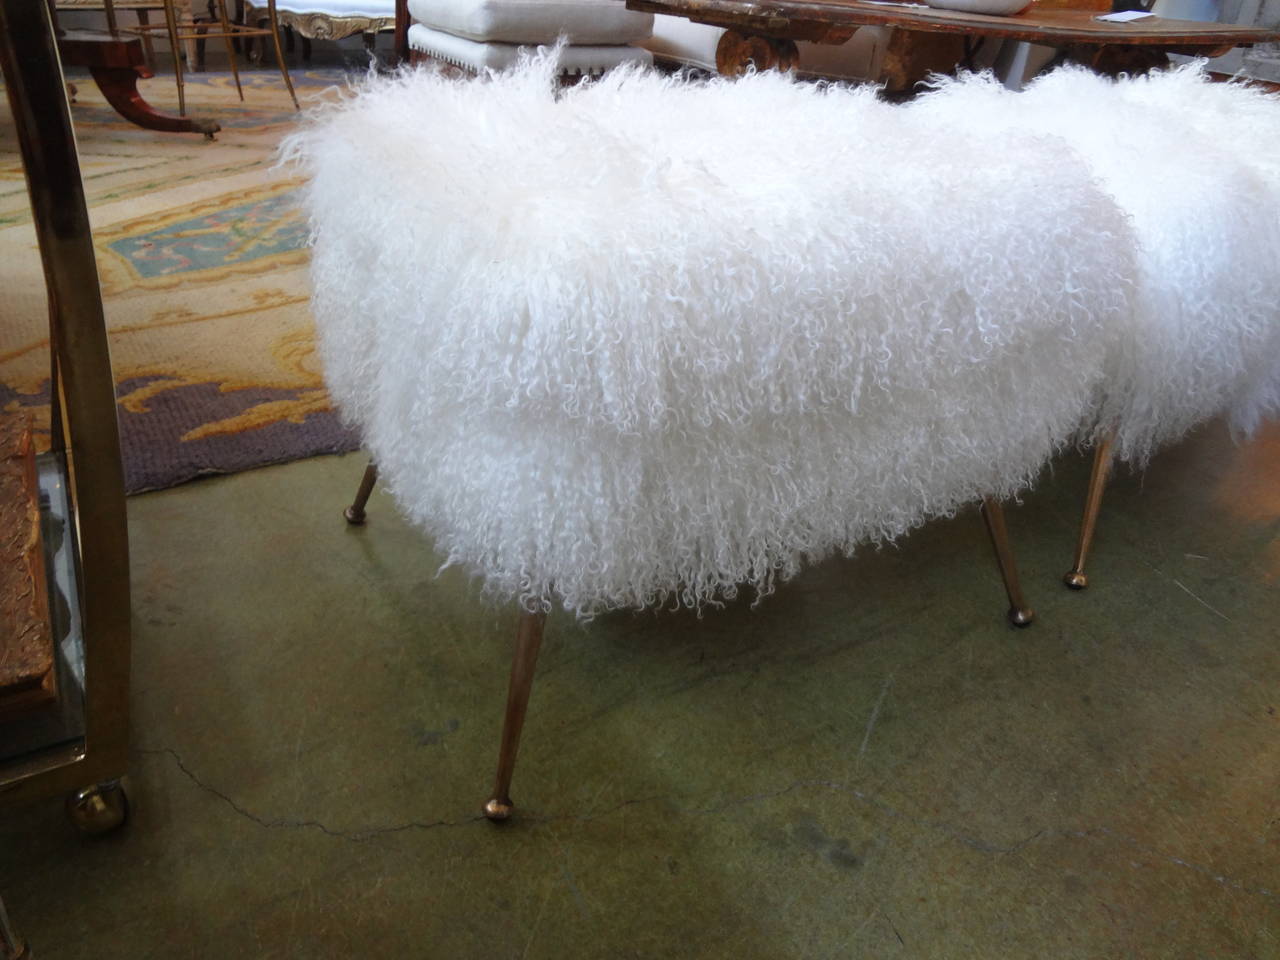 Chic pair of Italian Mid-Century Modern bronze stools newly upholstered in Mongolian lambs wool.

Please click KIRBY ANTIQUES logo below to view additional pieces from our vast inventory.